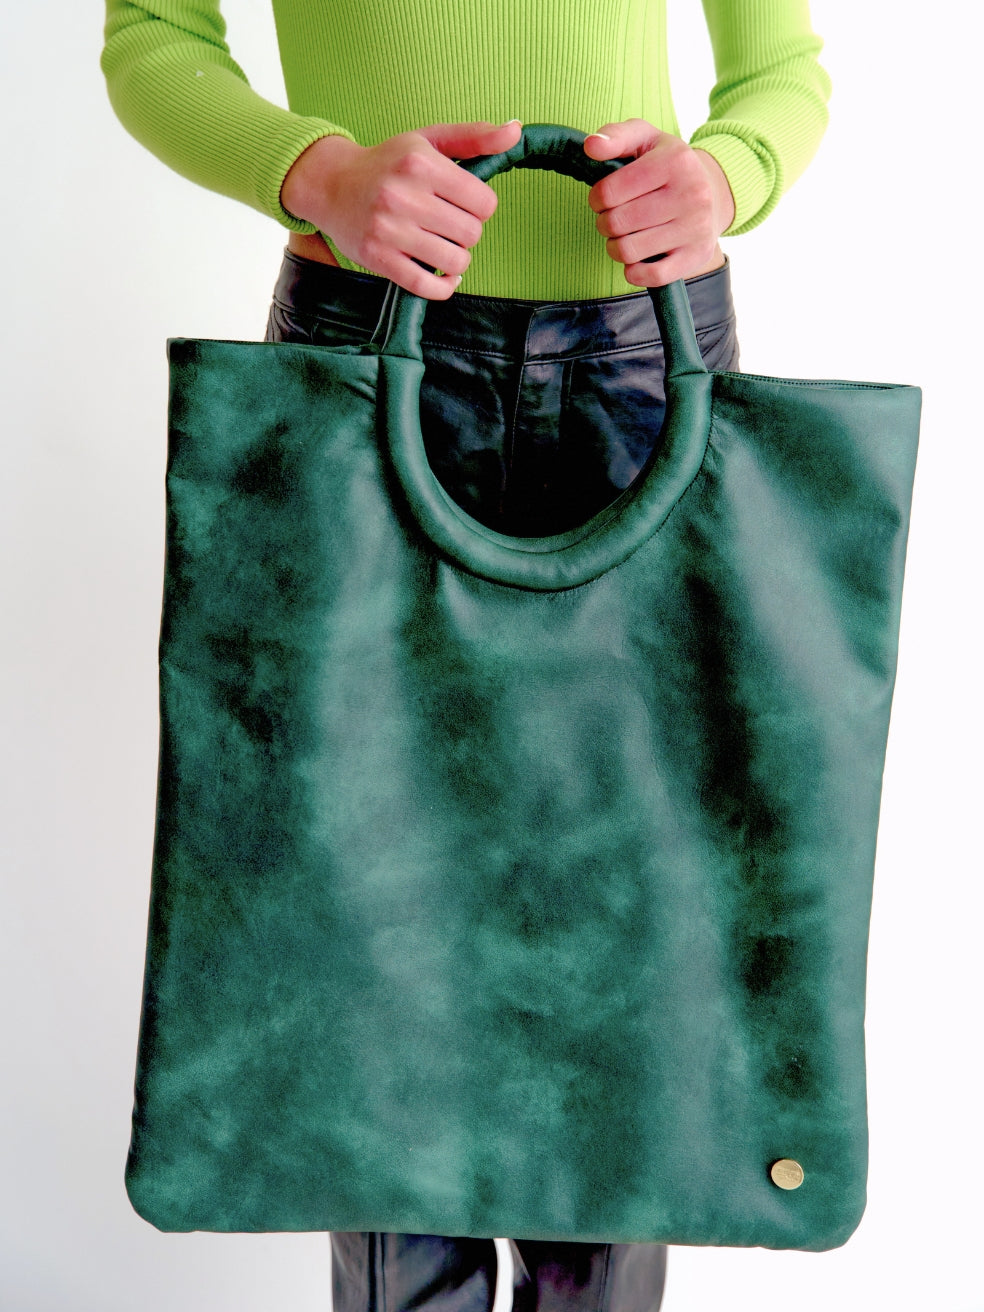 24 hour tote work travel bag oversized animal free leather pine green distressed